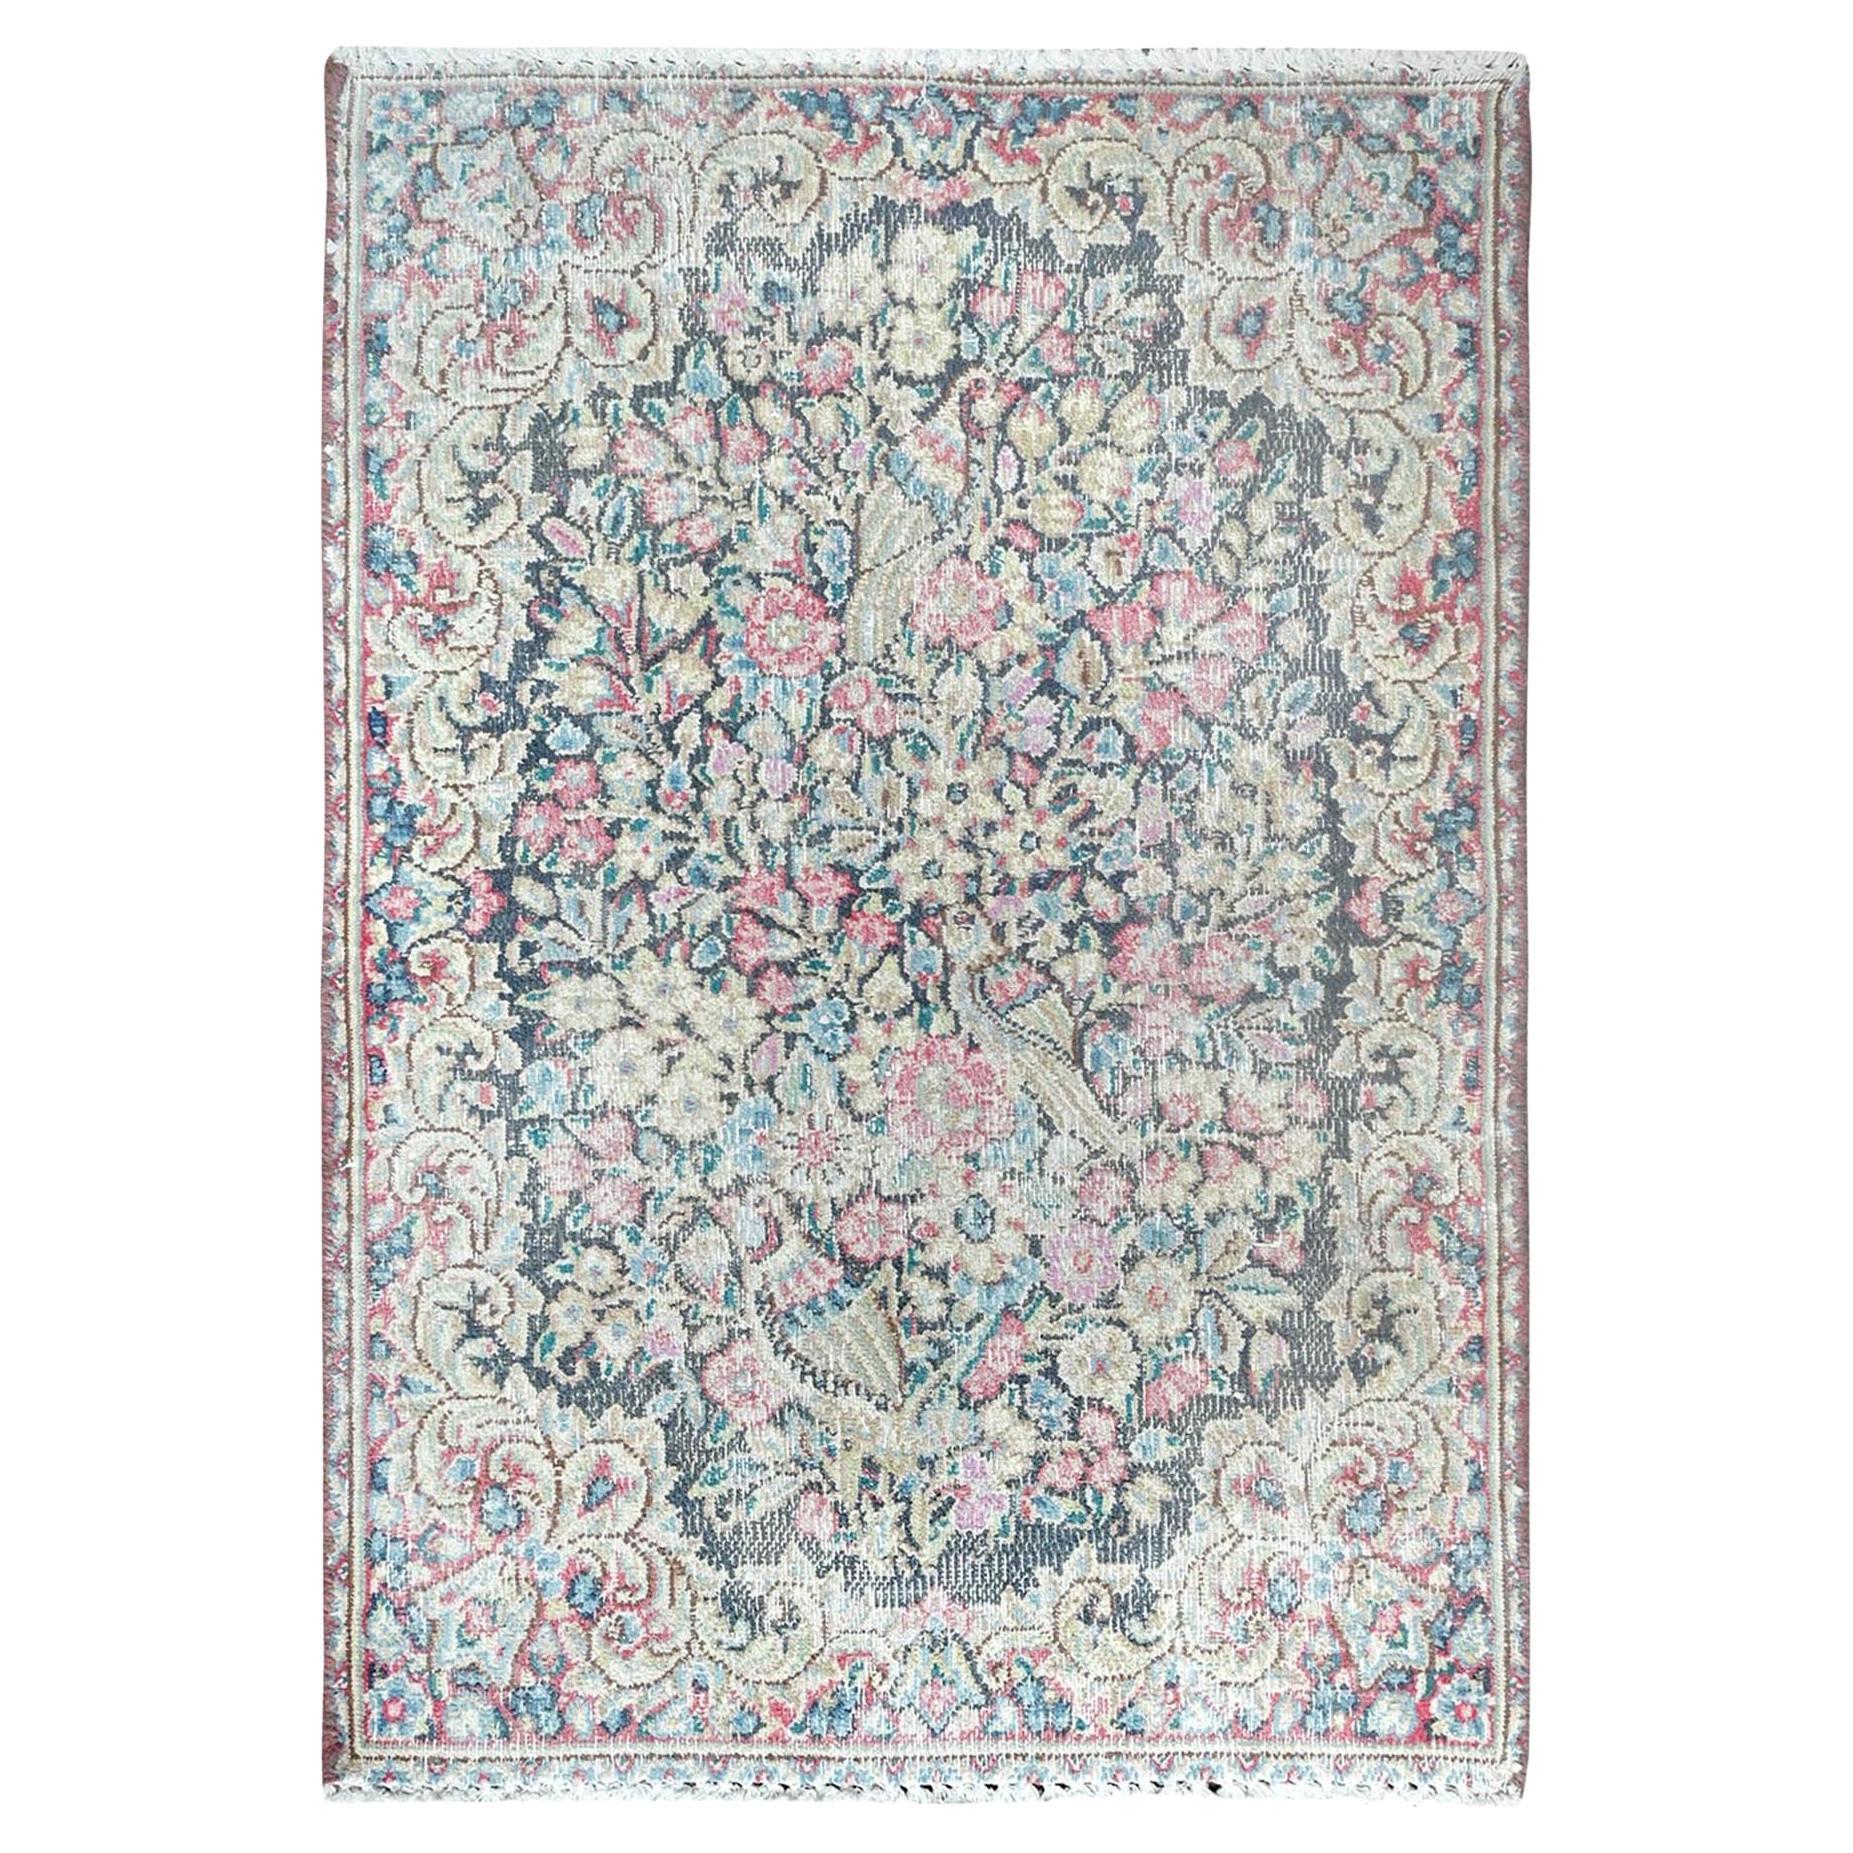 Colorful Worn Wool Hand Knotted Old Persian Kerman Distressed Look Rug